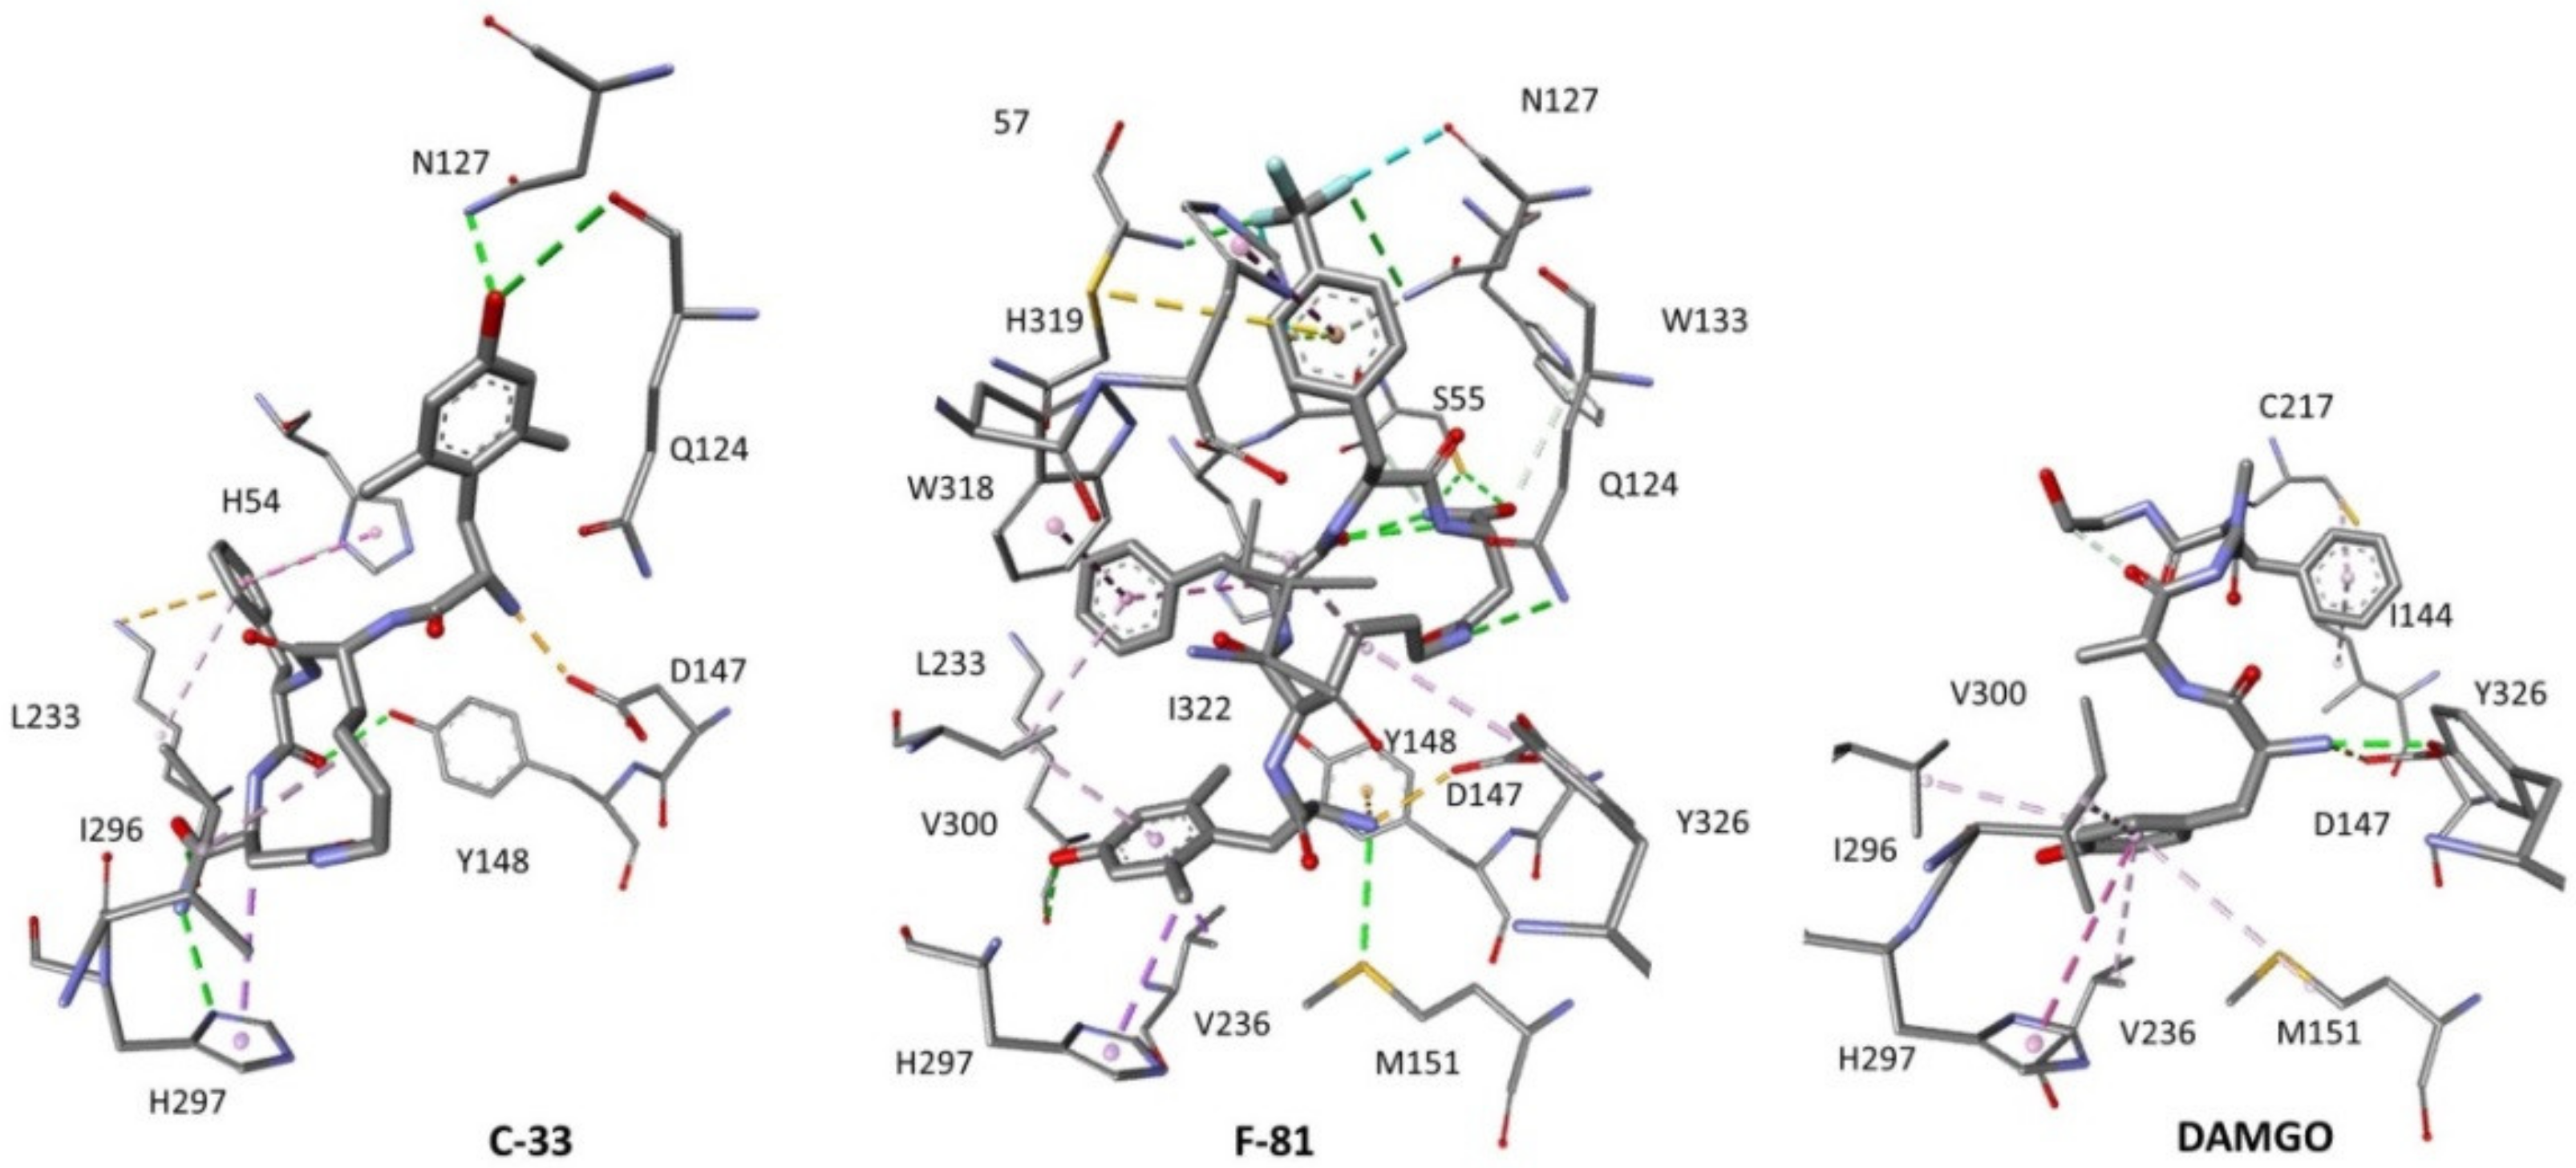 Molecules | Free Full-Text | Pharmacological Characterization of µ-Opioid  Receptor Agonists with Biased G Protein or β-Arrestin Signaling, and  Computational Study of Conformational Changes during Receptor Activation |  HTML